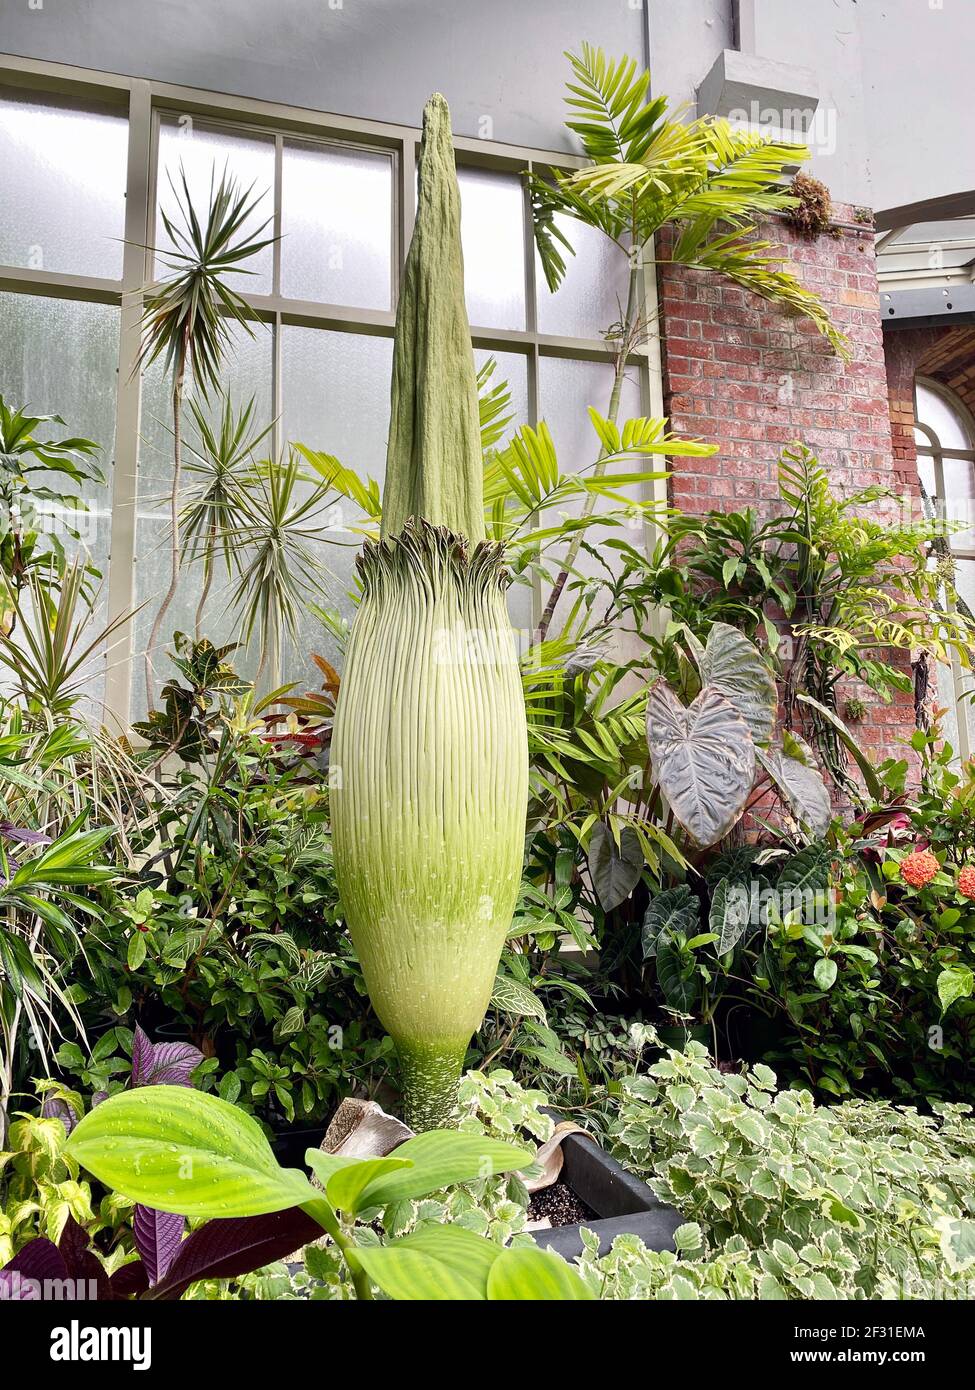 Amorphophallus titanum, the titan arum, is a flowering plant with the largest unbranched inflorescence in the world. The talipot palm, Corypha umbracu Stock Photo